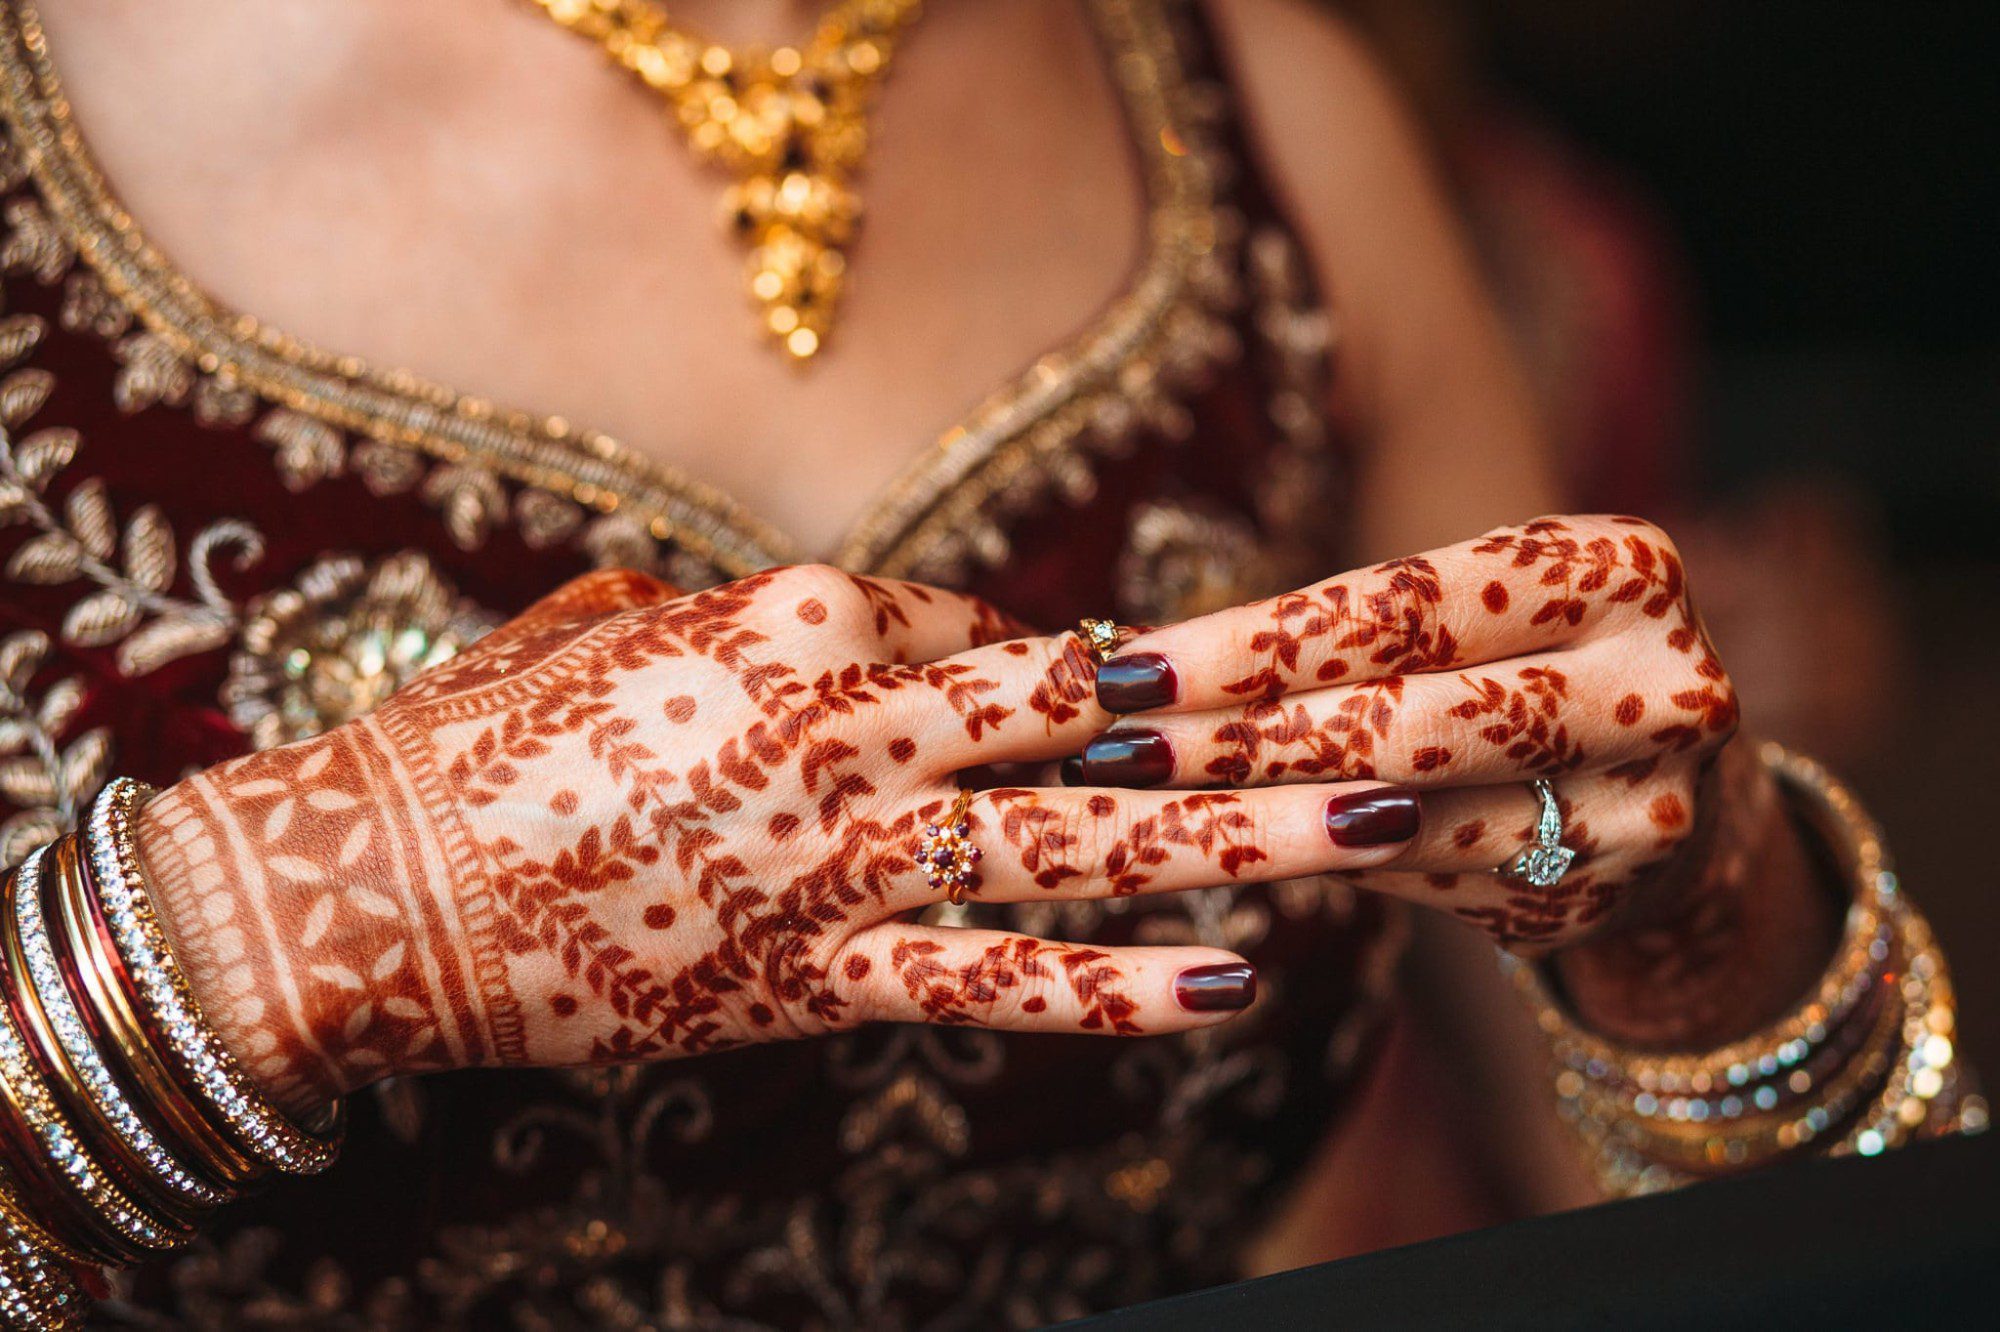 Indian bride putting a ring on her finger